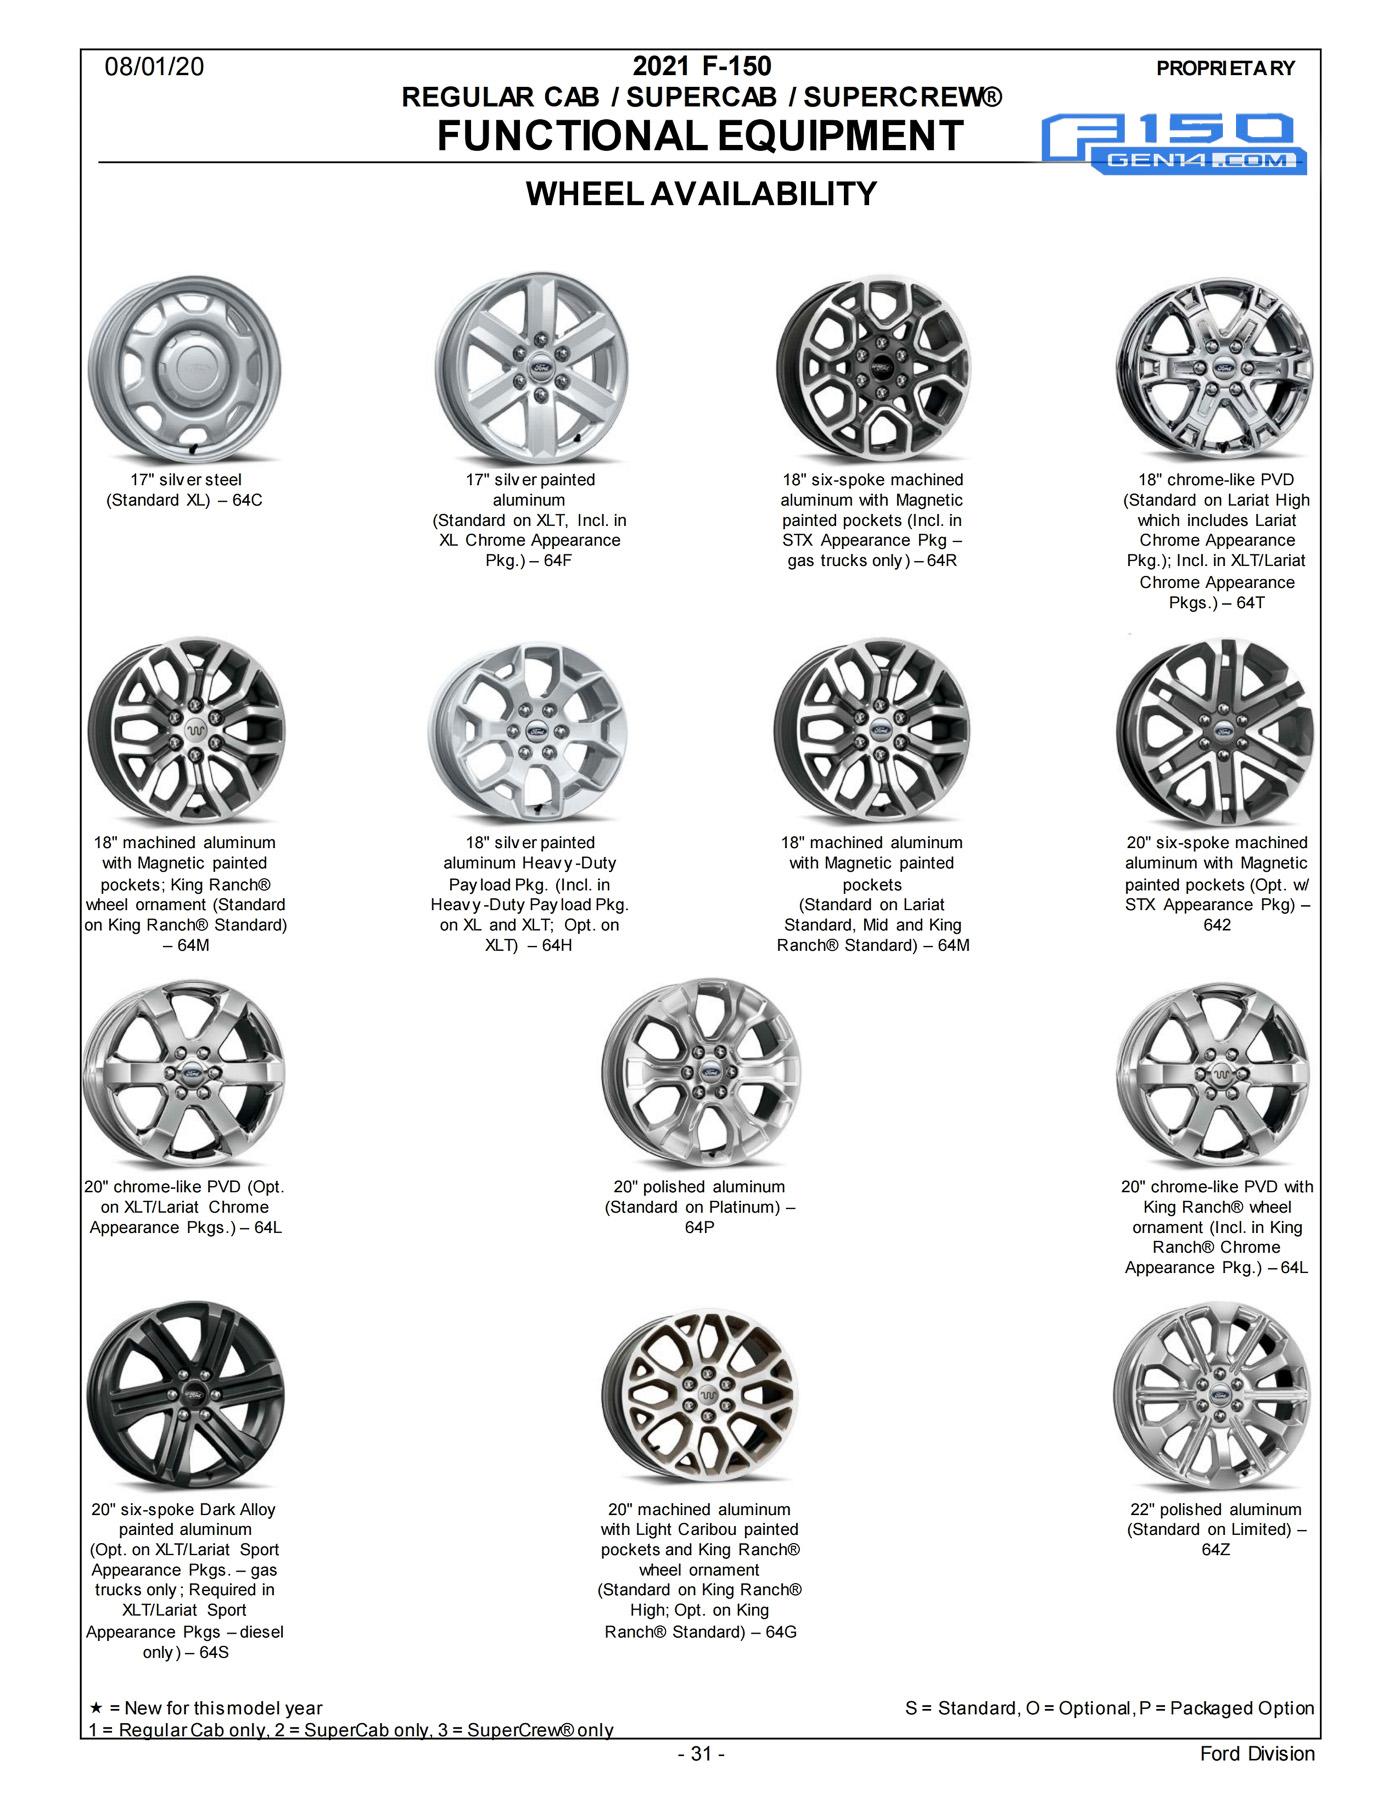 Ford F-150 Lightning Factory Wheels Comparison - 2021 F-150 (XL, STX, XLT, Lariat, King Ranch, Platinum, Limited) 2021-F-150-Order-Guide-Packages-Options-Features-32